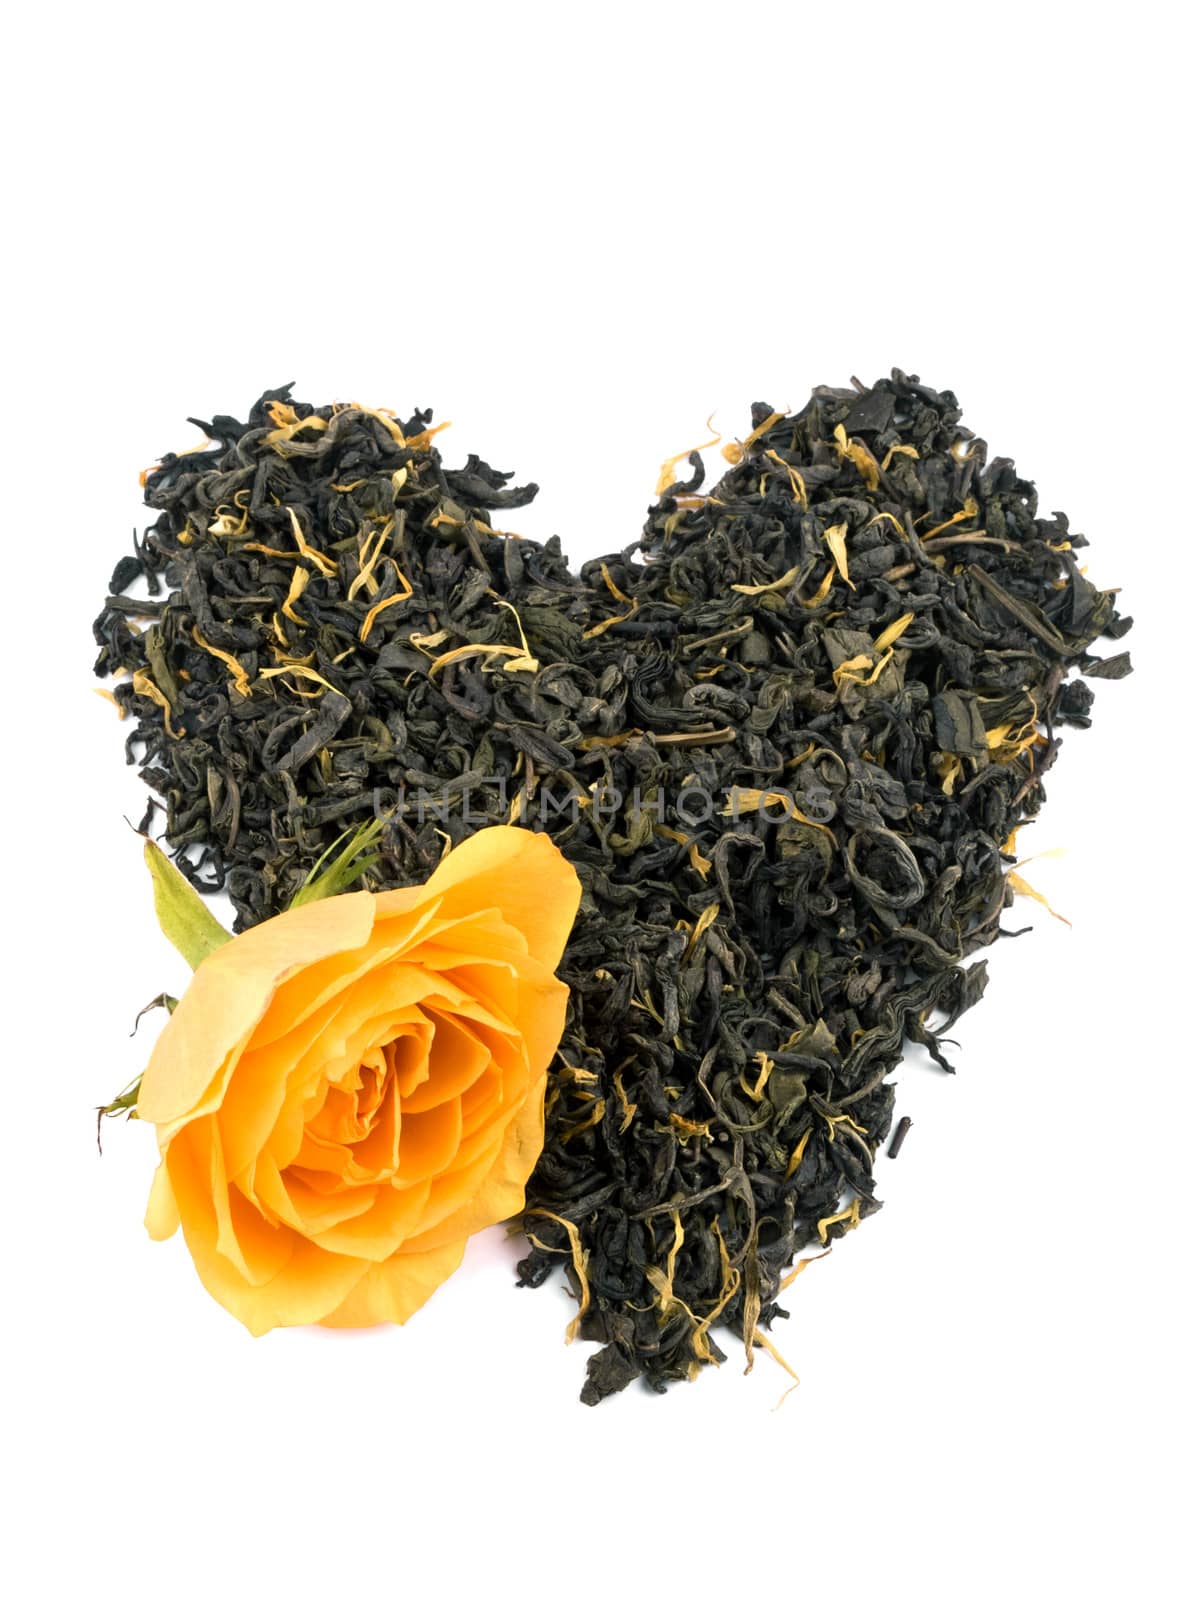 Aromatic green tea leaves with marigold petals formed on heart on white background